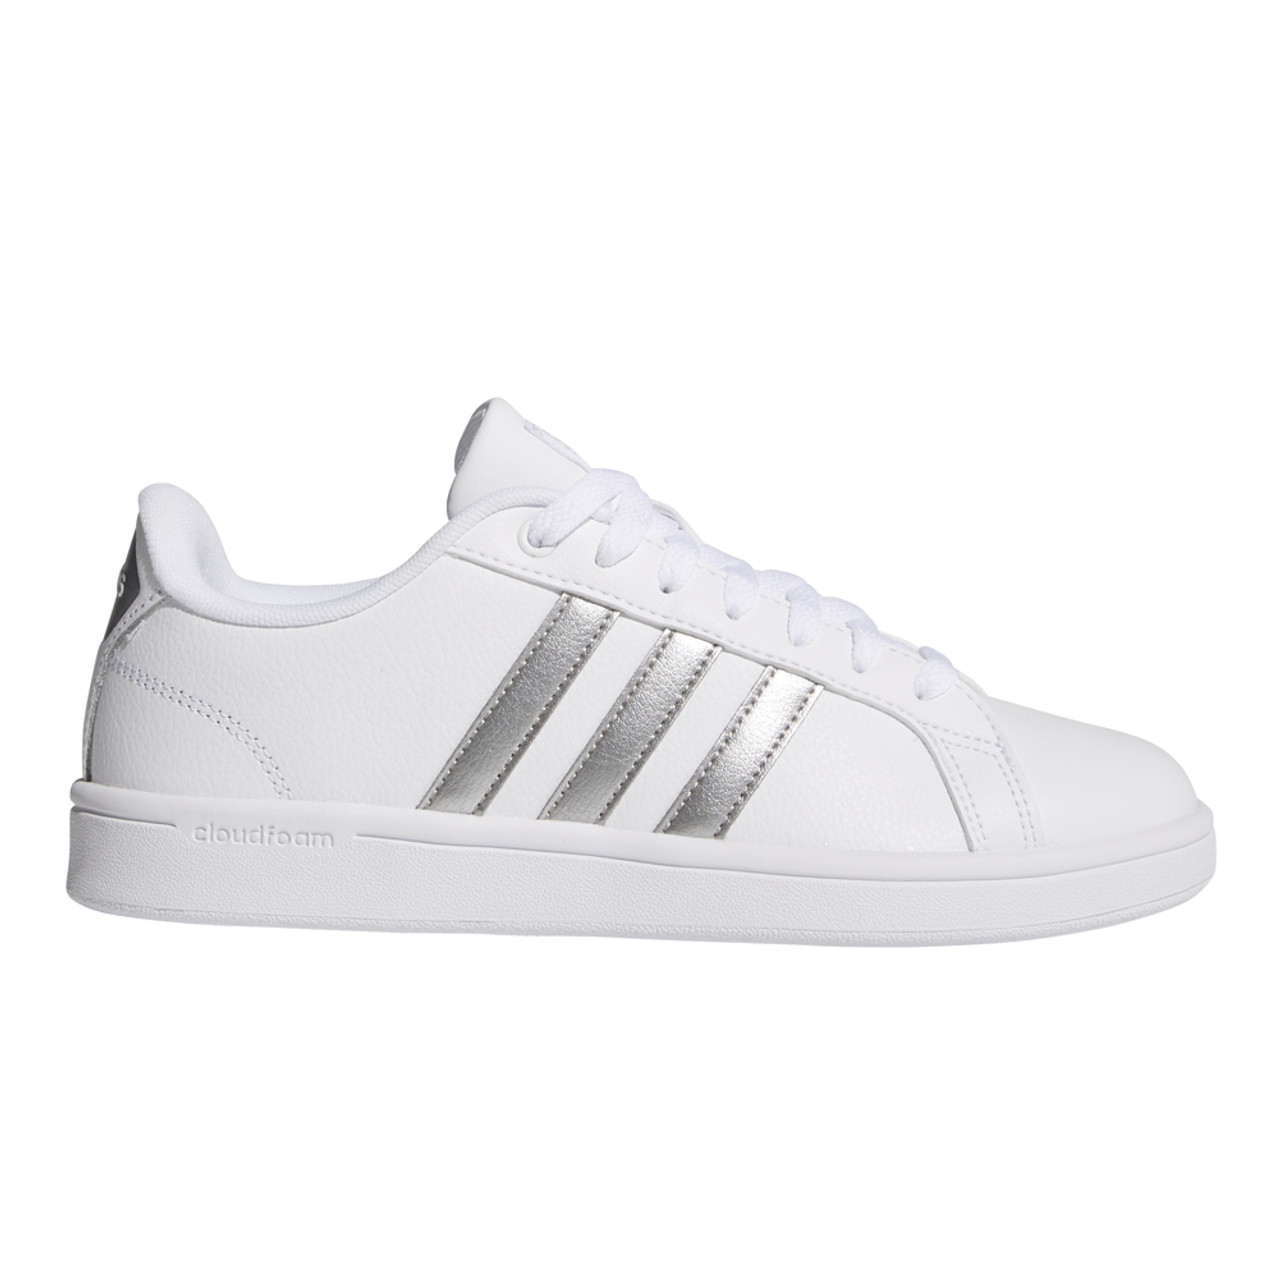 adidas Advantage Men's Sneakers – RUNNERS SPORTS